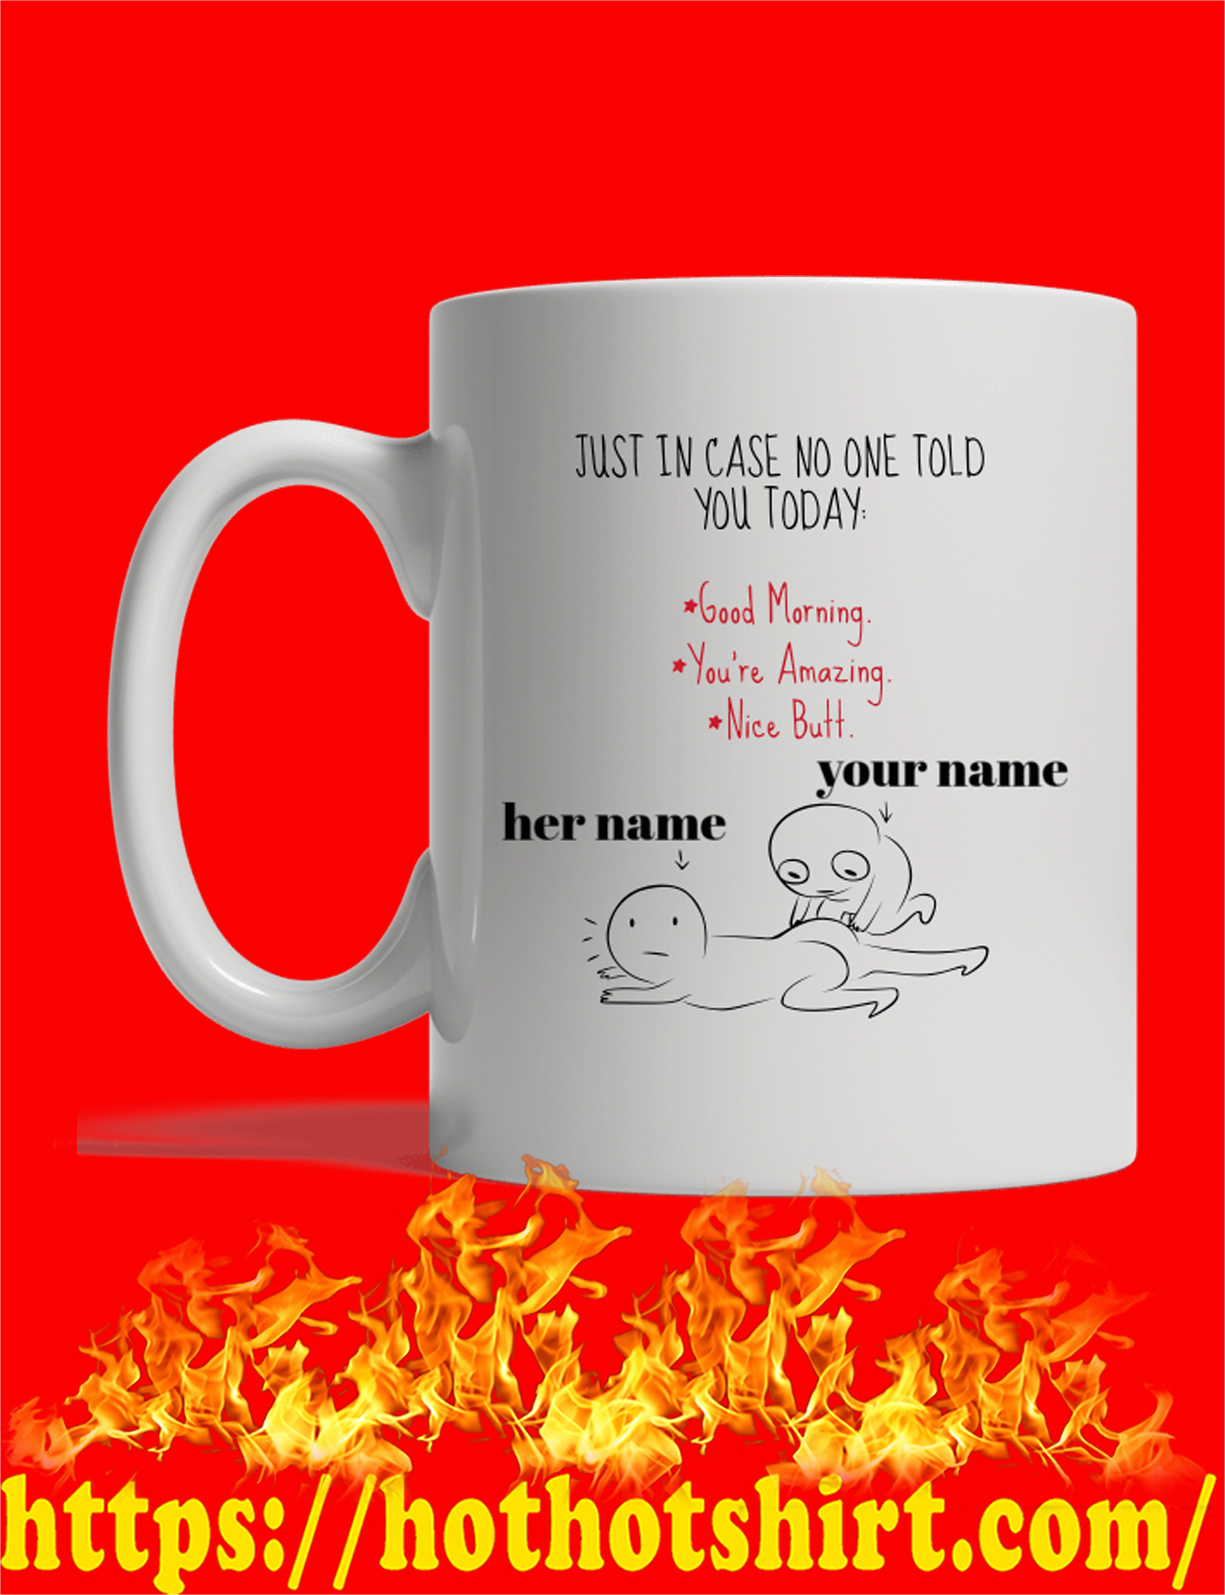 Personalized custom Just in case no one told you today good morning mug